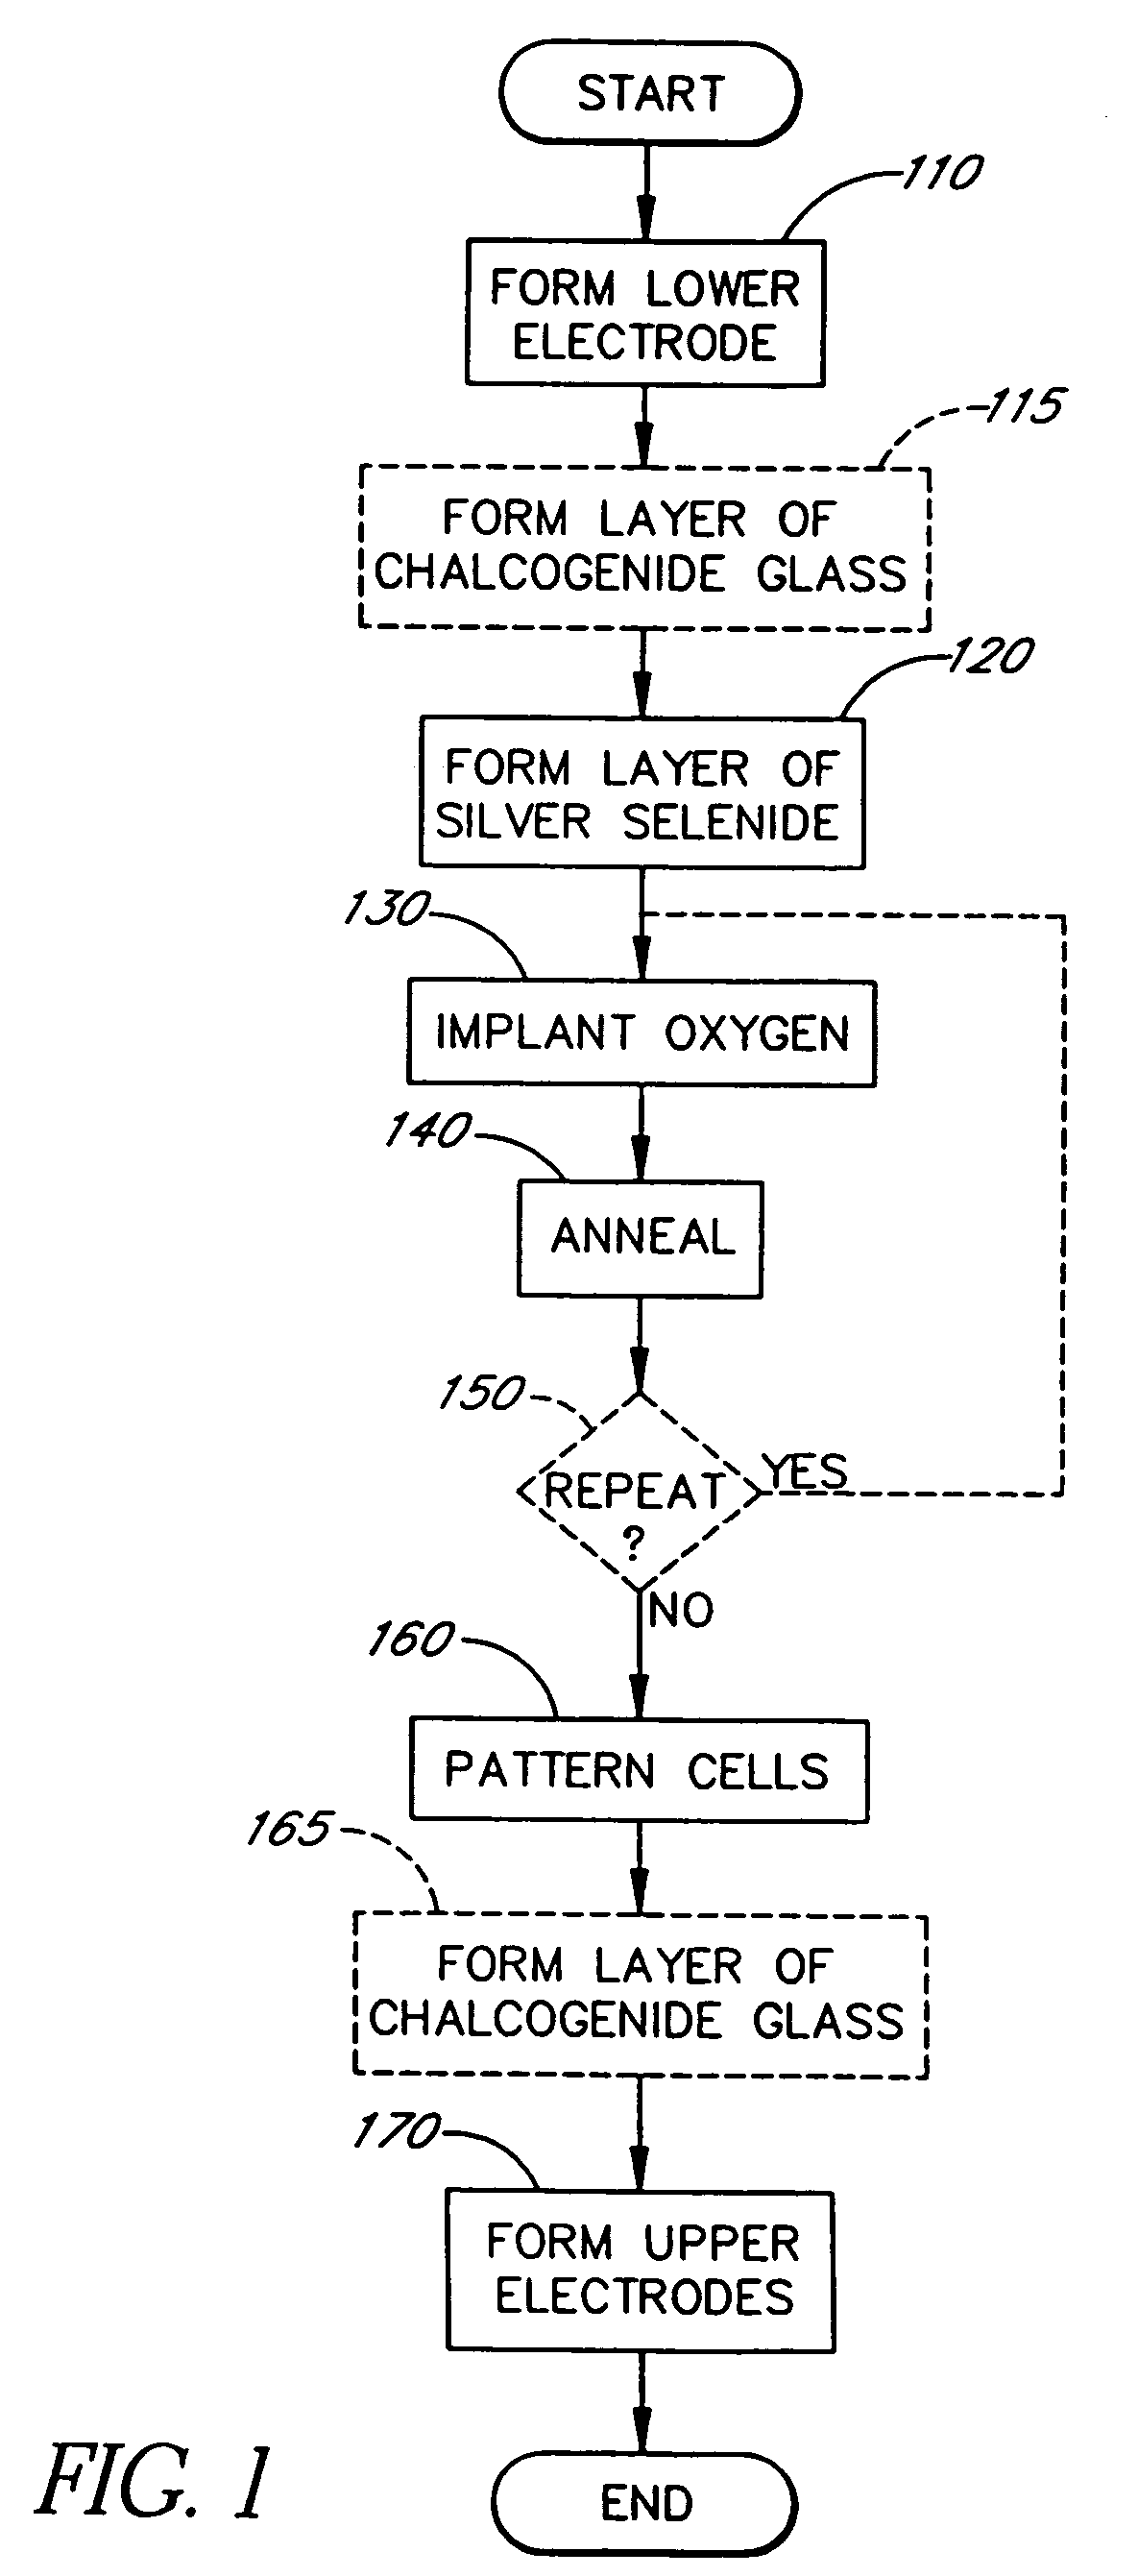 Methods to form a memory cell with metal-rich metal chalcogenide